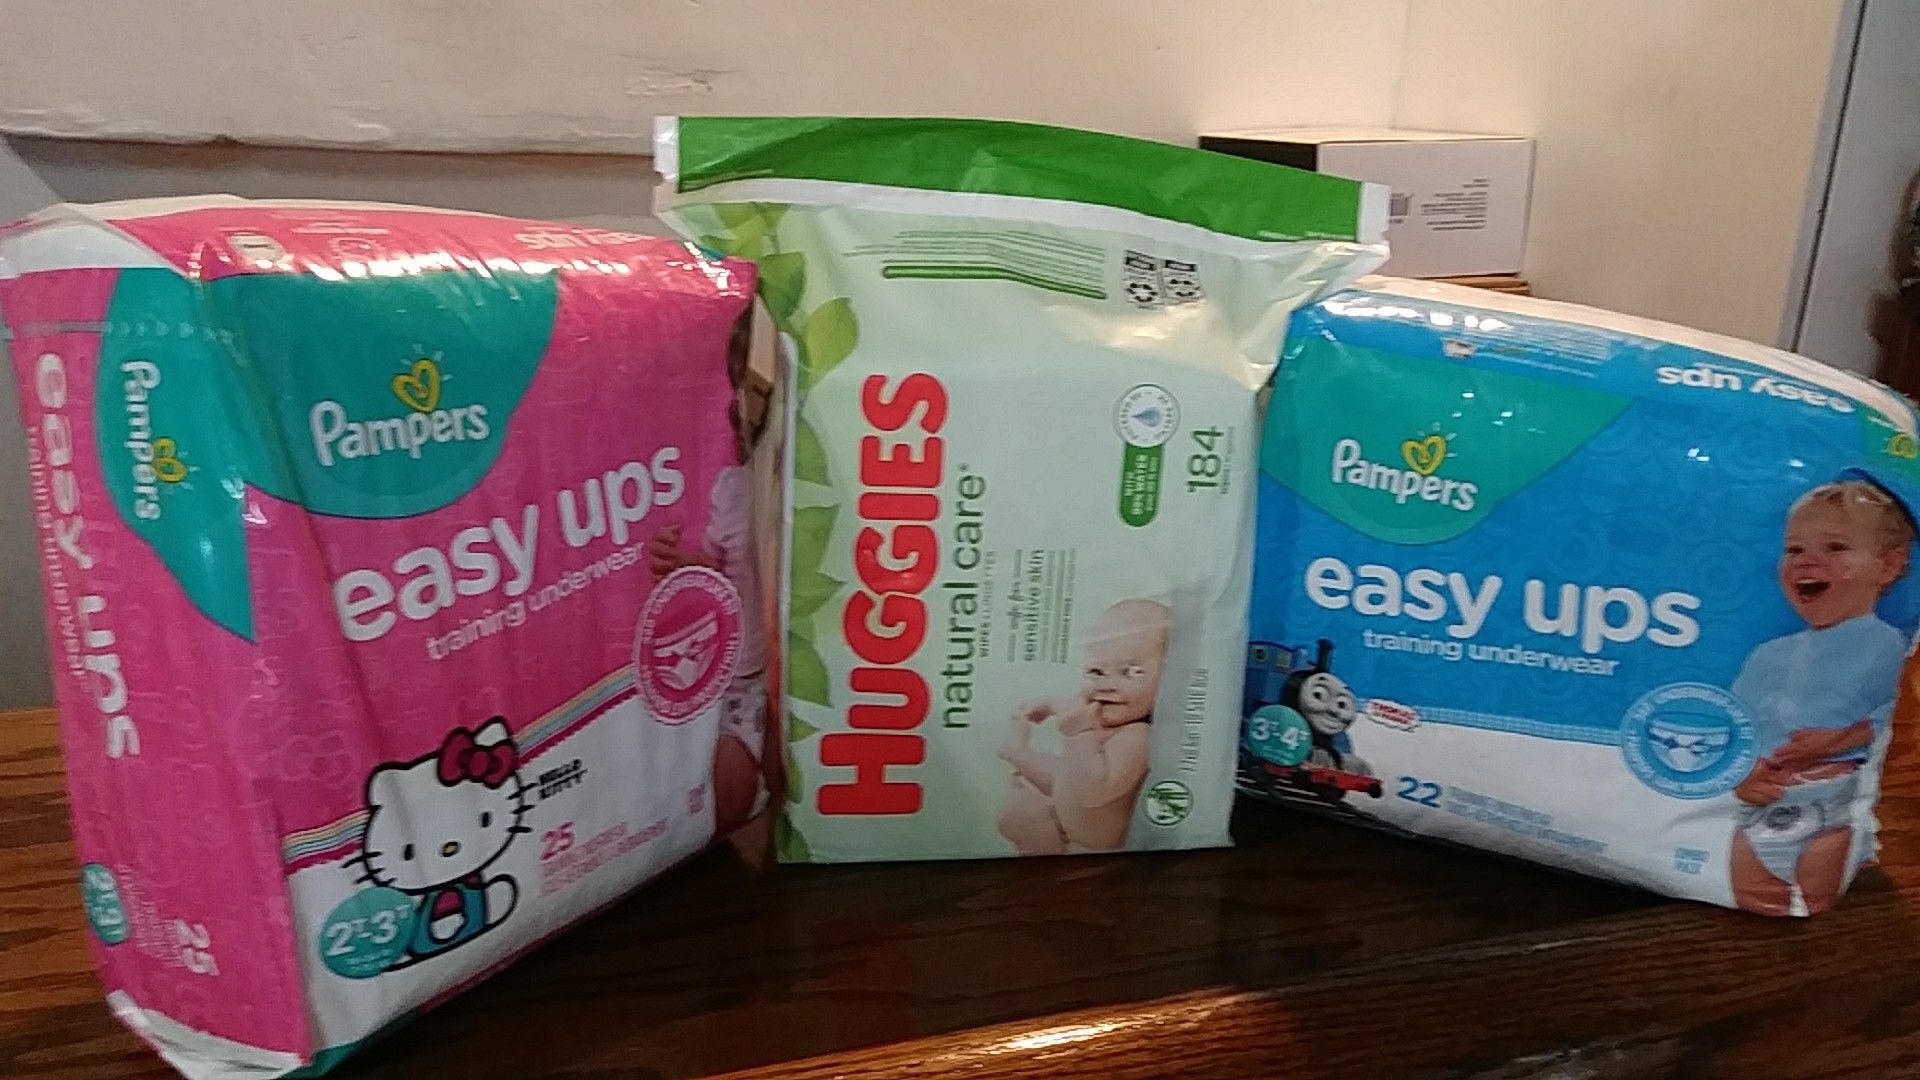 Huggies and pampers